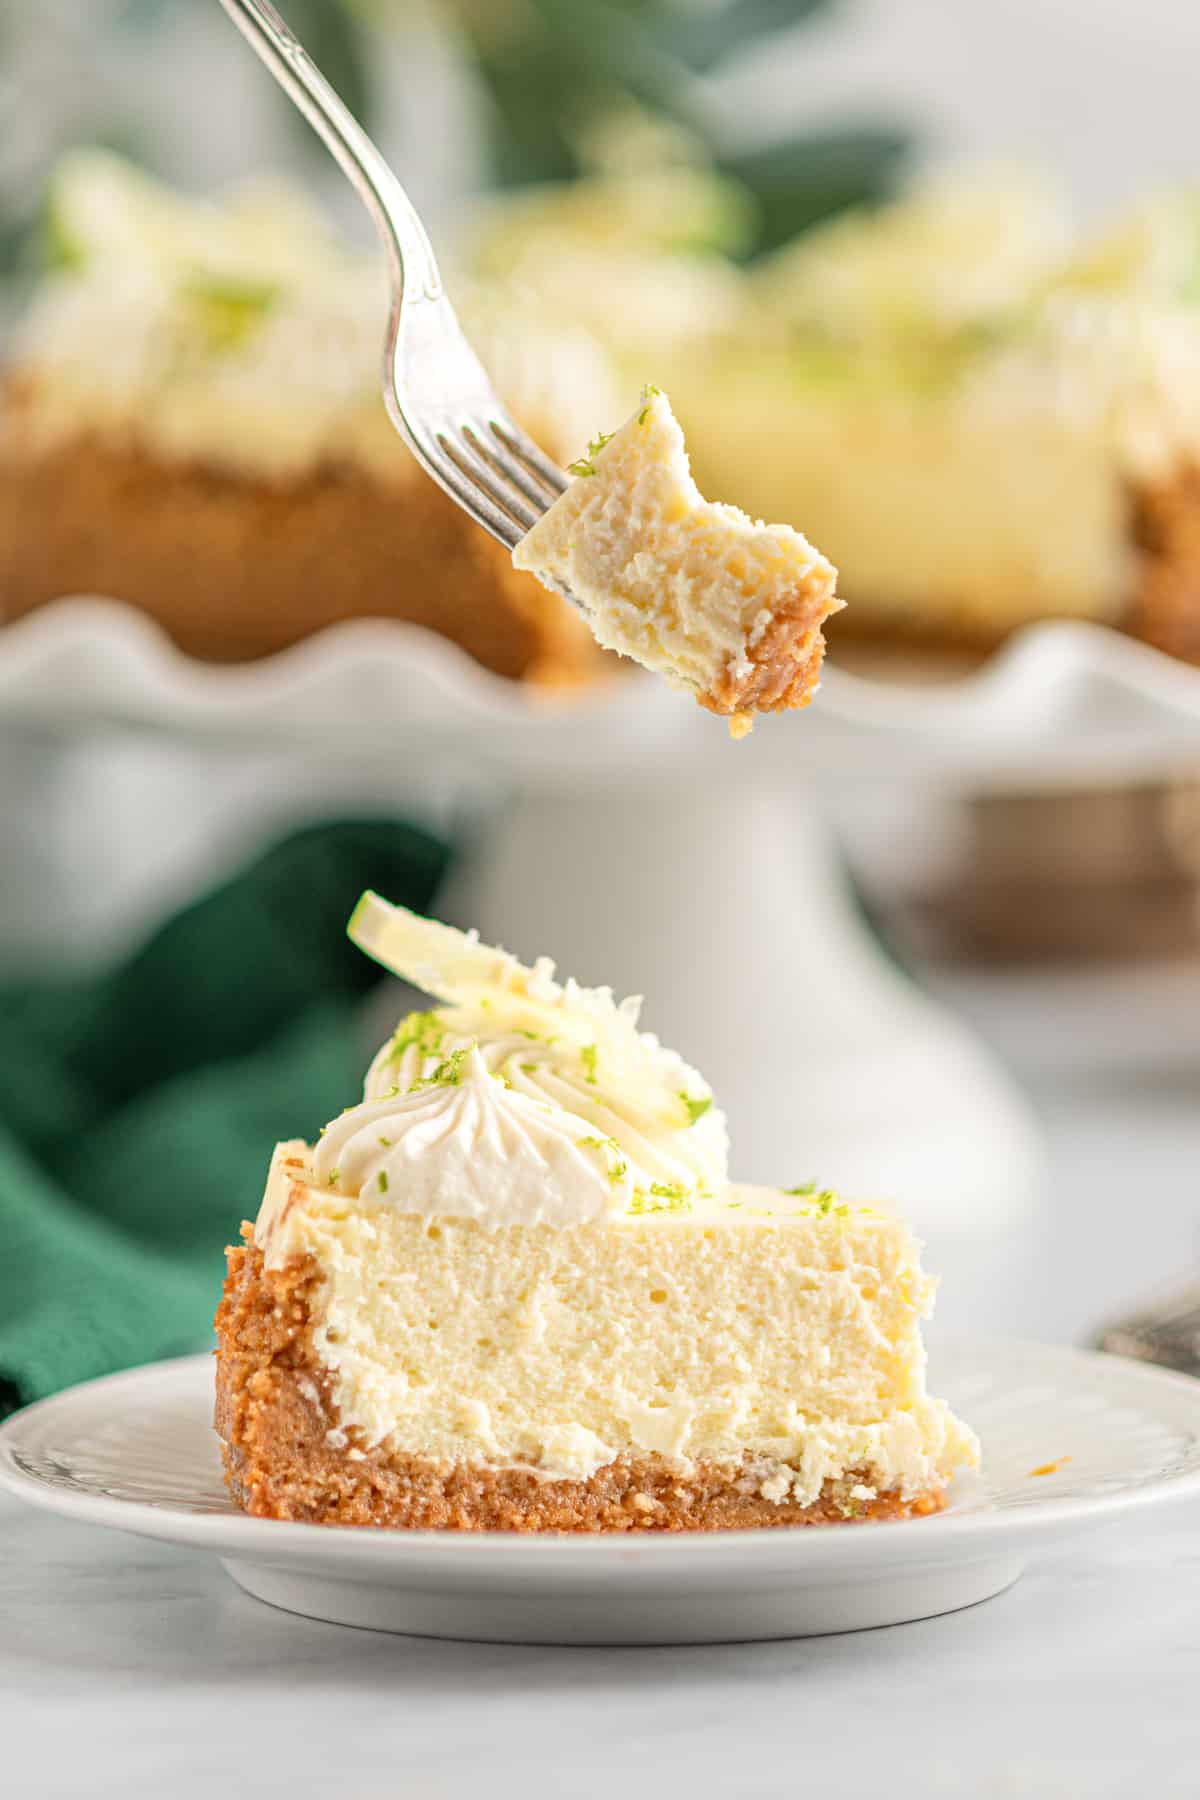 a slice of key lime cheesecake viewed from the side